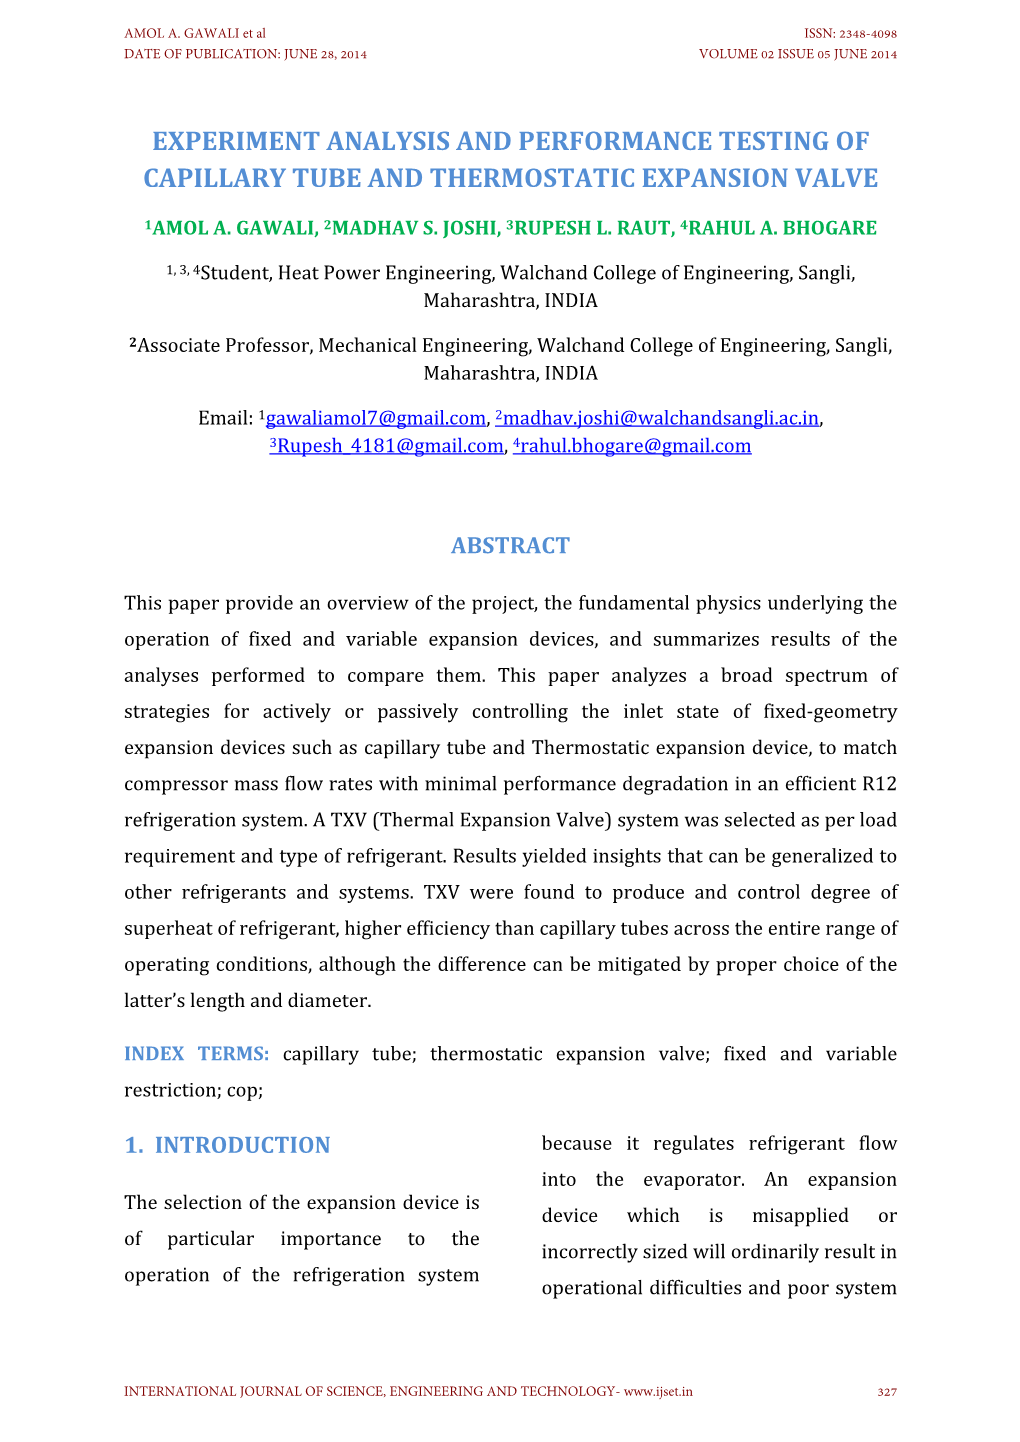 Experiment Analysis and Performance Testing of Capillary Tube and Thermostatic Expansion Valve